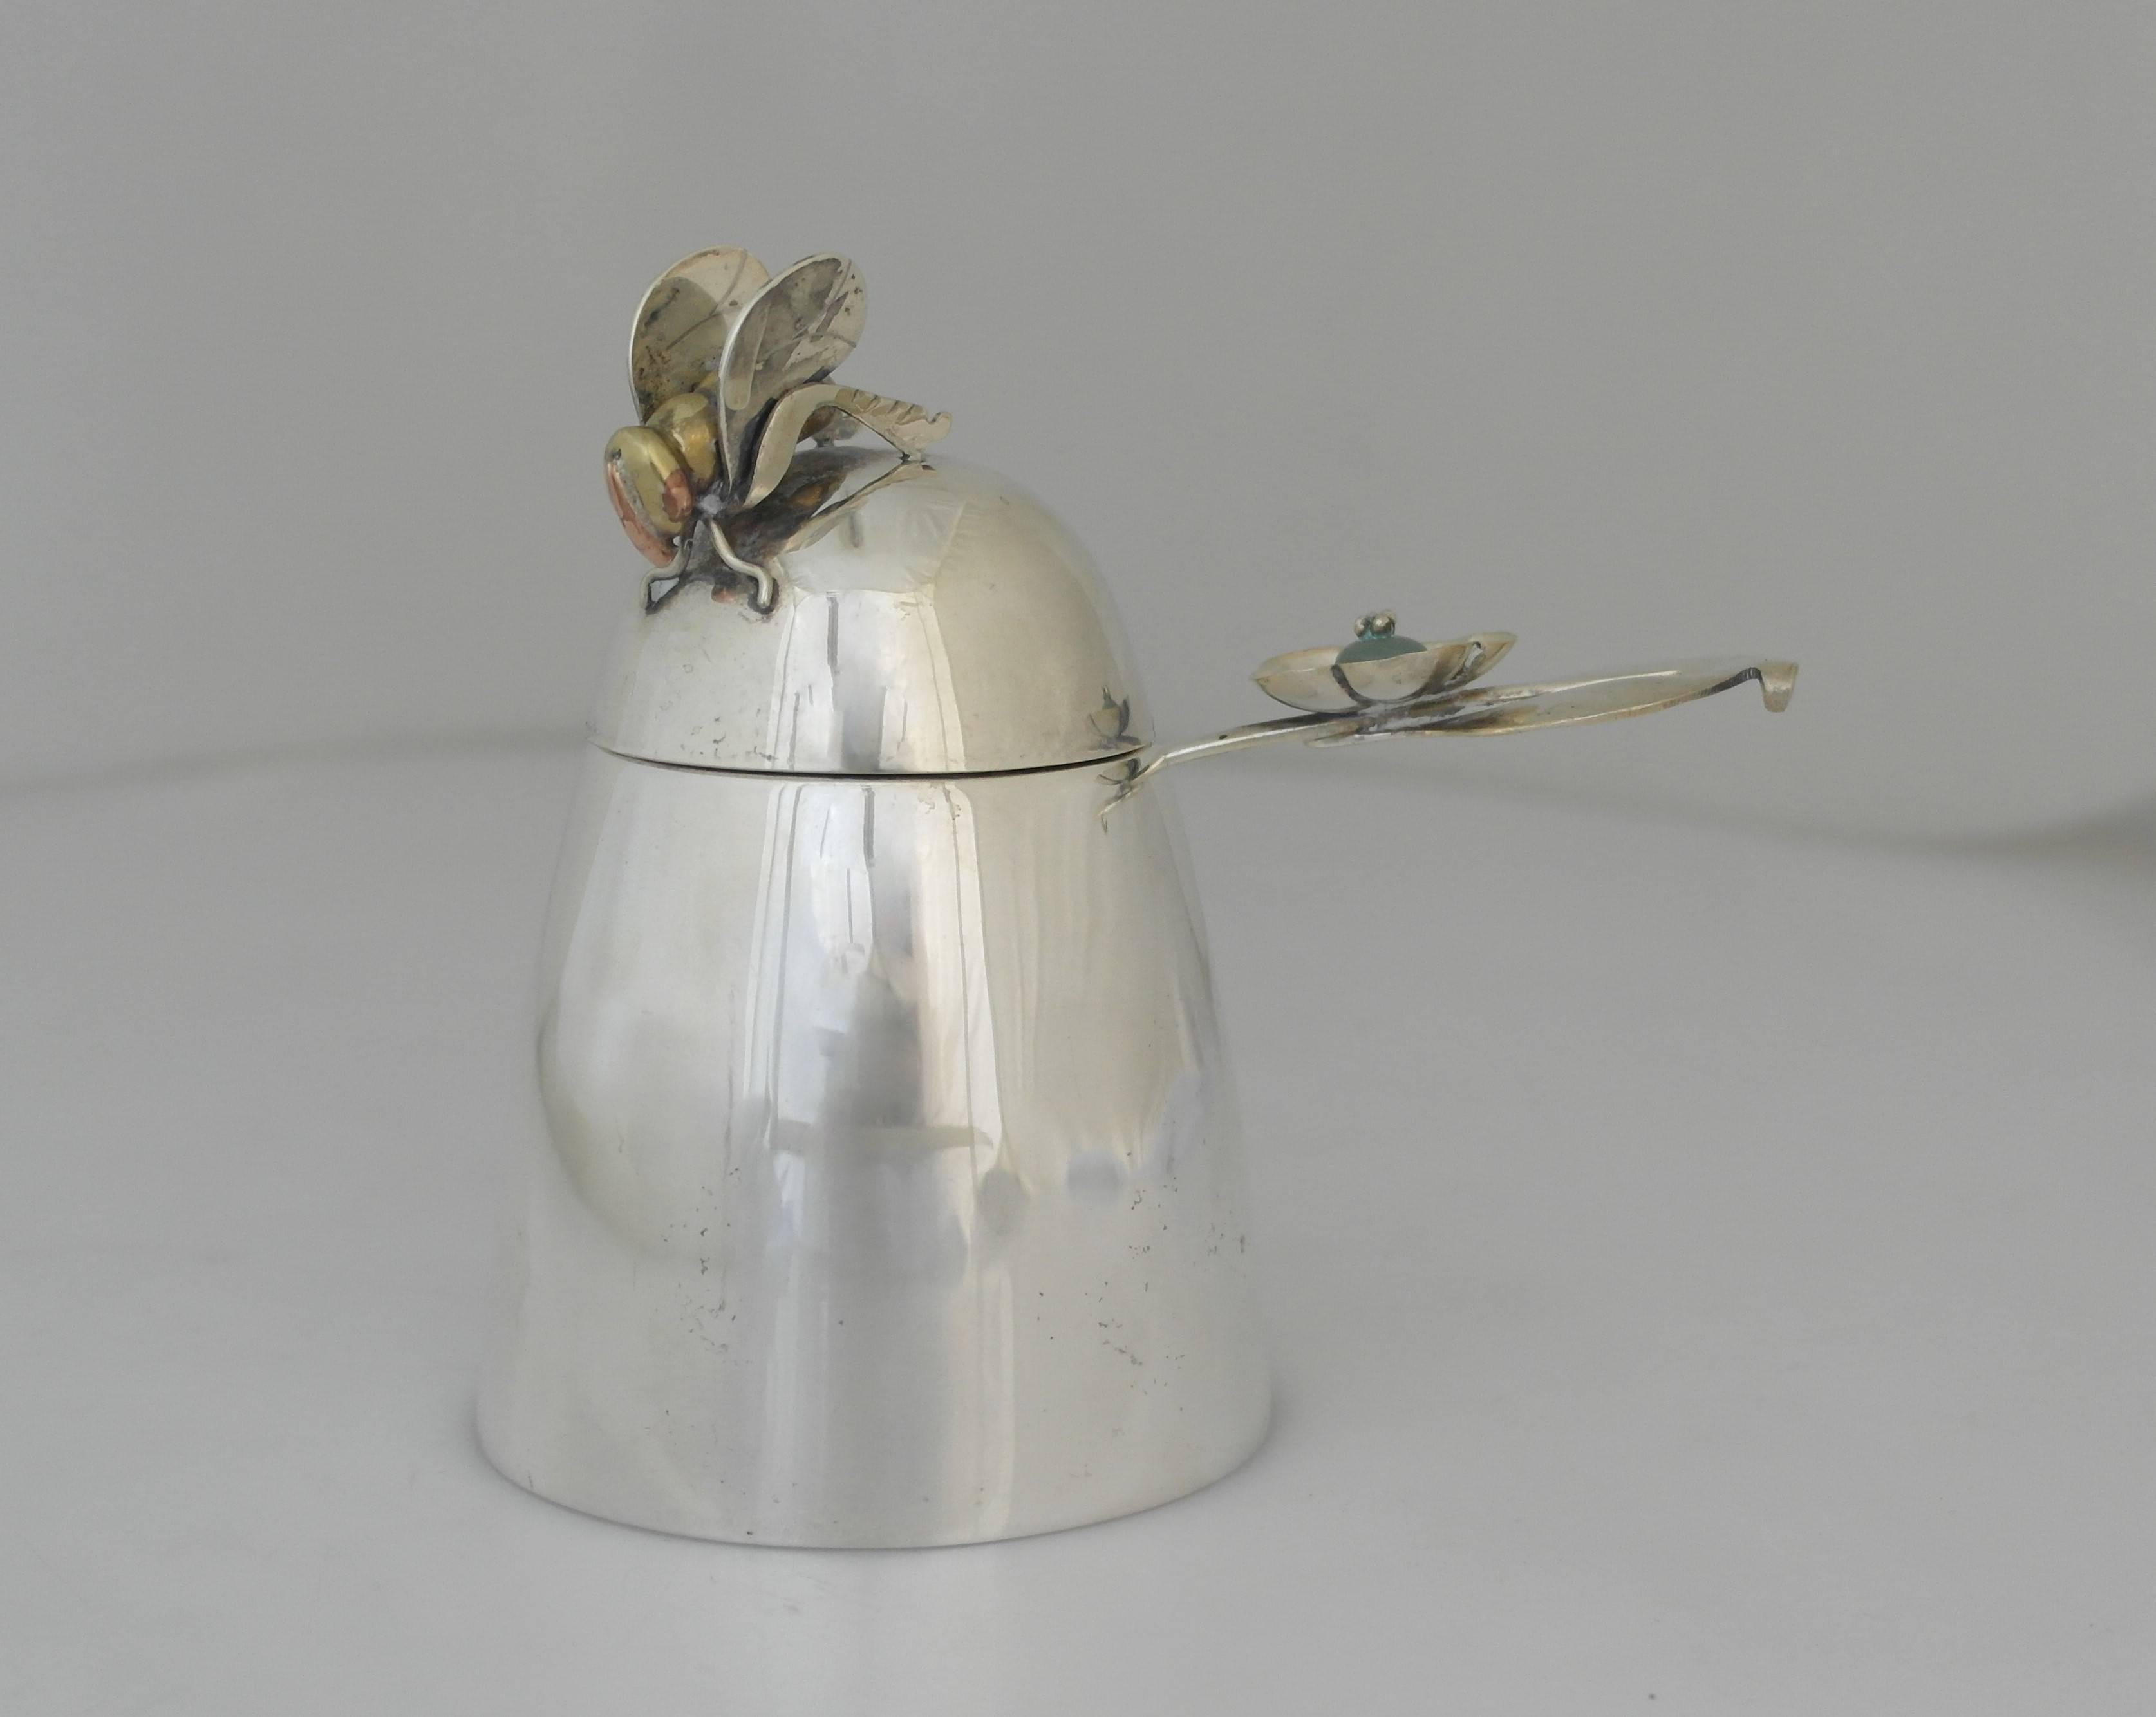 Being offered is a circa 1990 silverplate honey pot made by Los Castillo of Taxco, Mexico. Honey pot In the form of a beehive with an applied bee on the removable lid; serving spoon included. Dimensions: 5 1/2 inches height x 3 1/2 inches diameter.